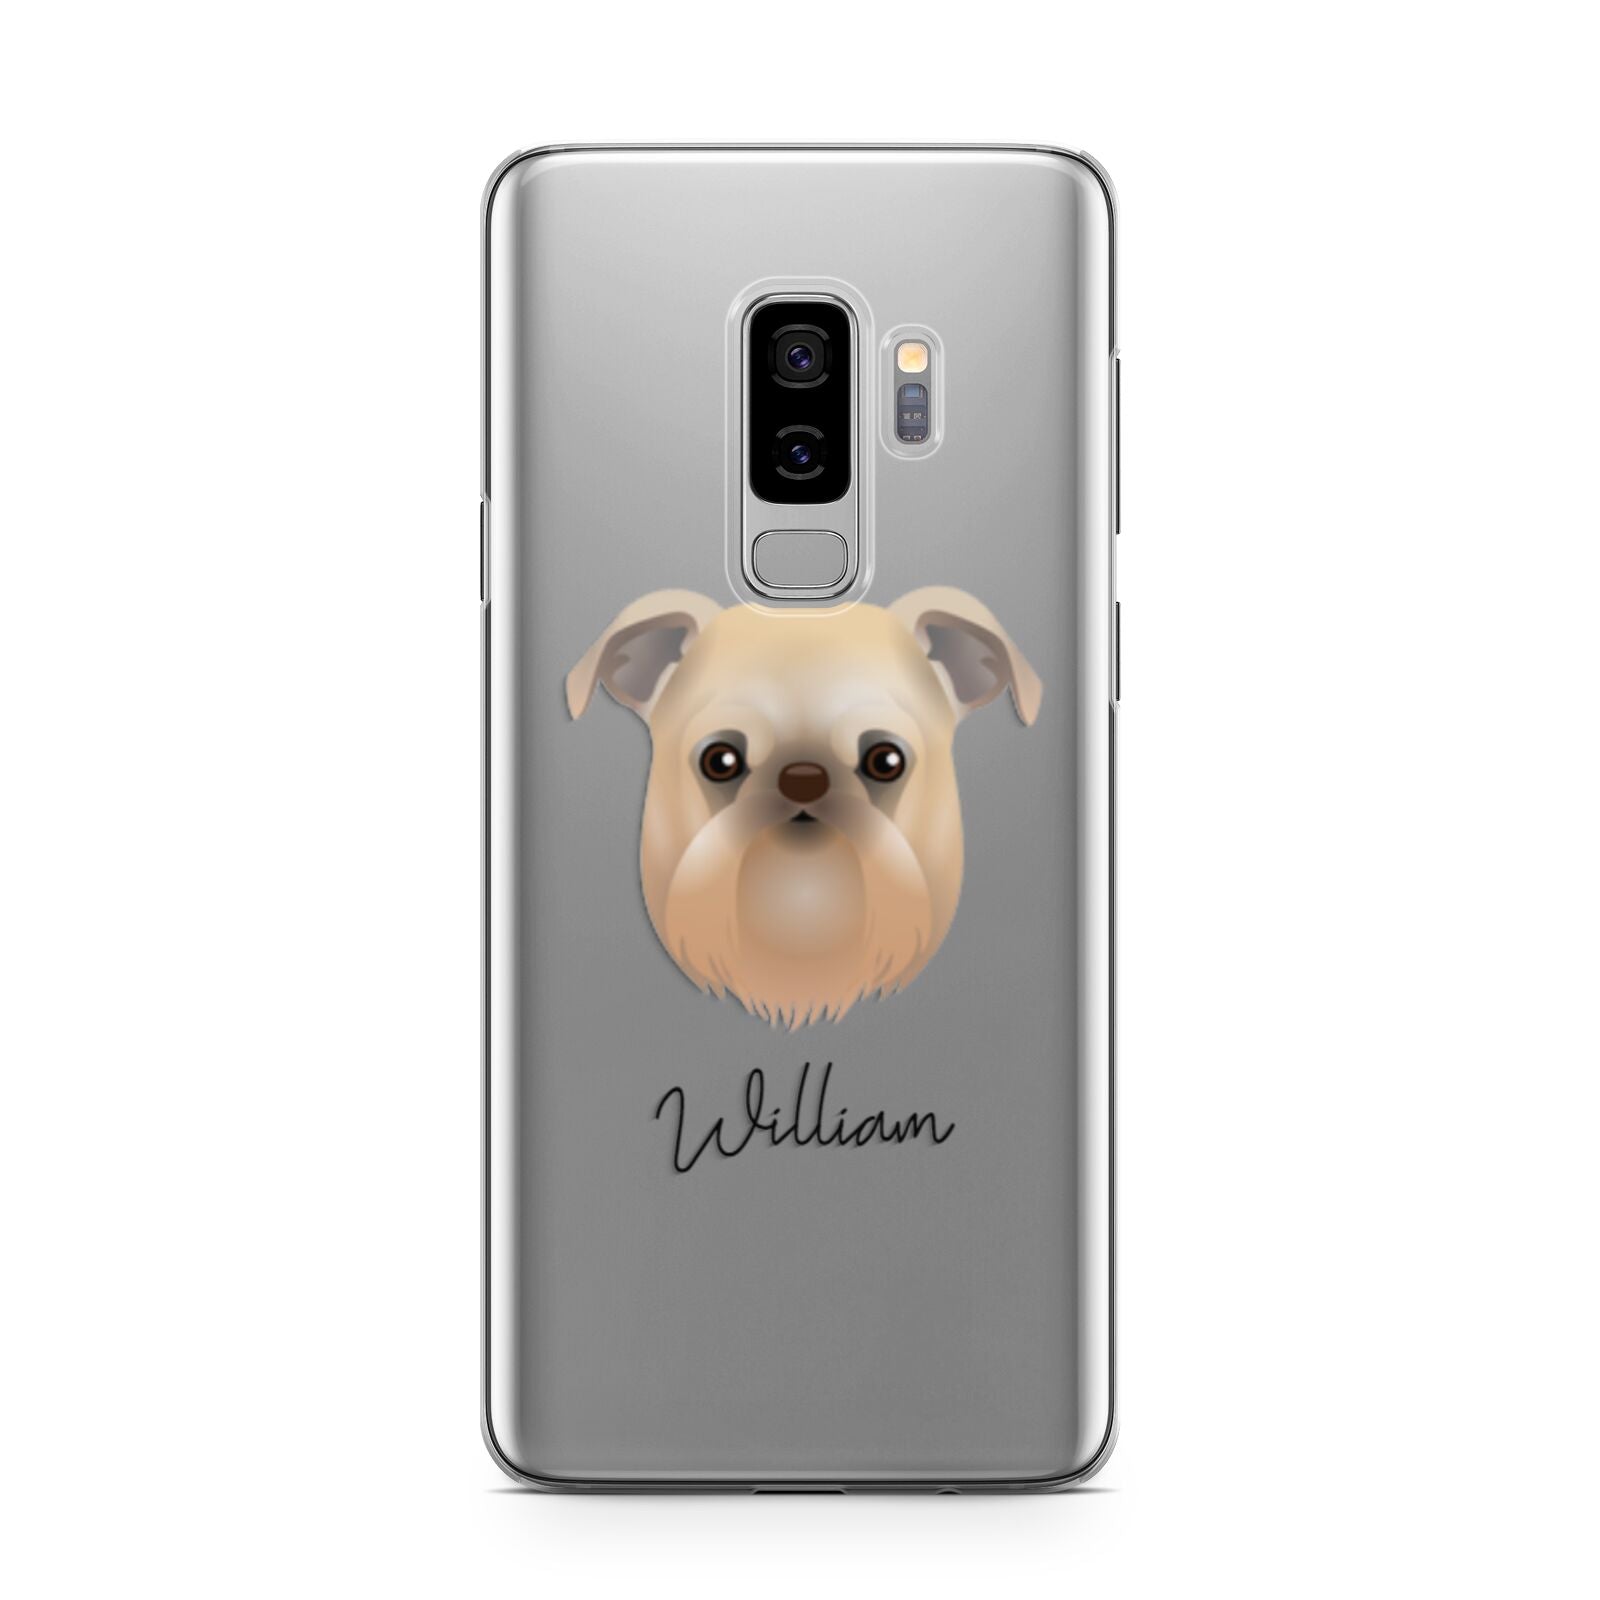 Griffon Bruxellois Personalised Samsung Galaxy S9 Plus Case on Silver phone